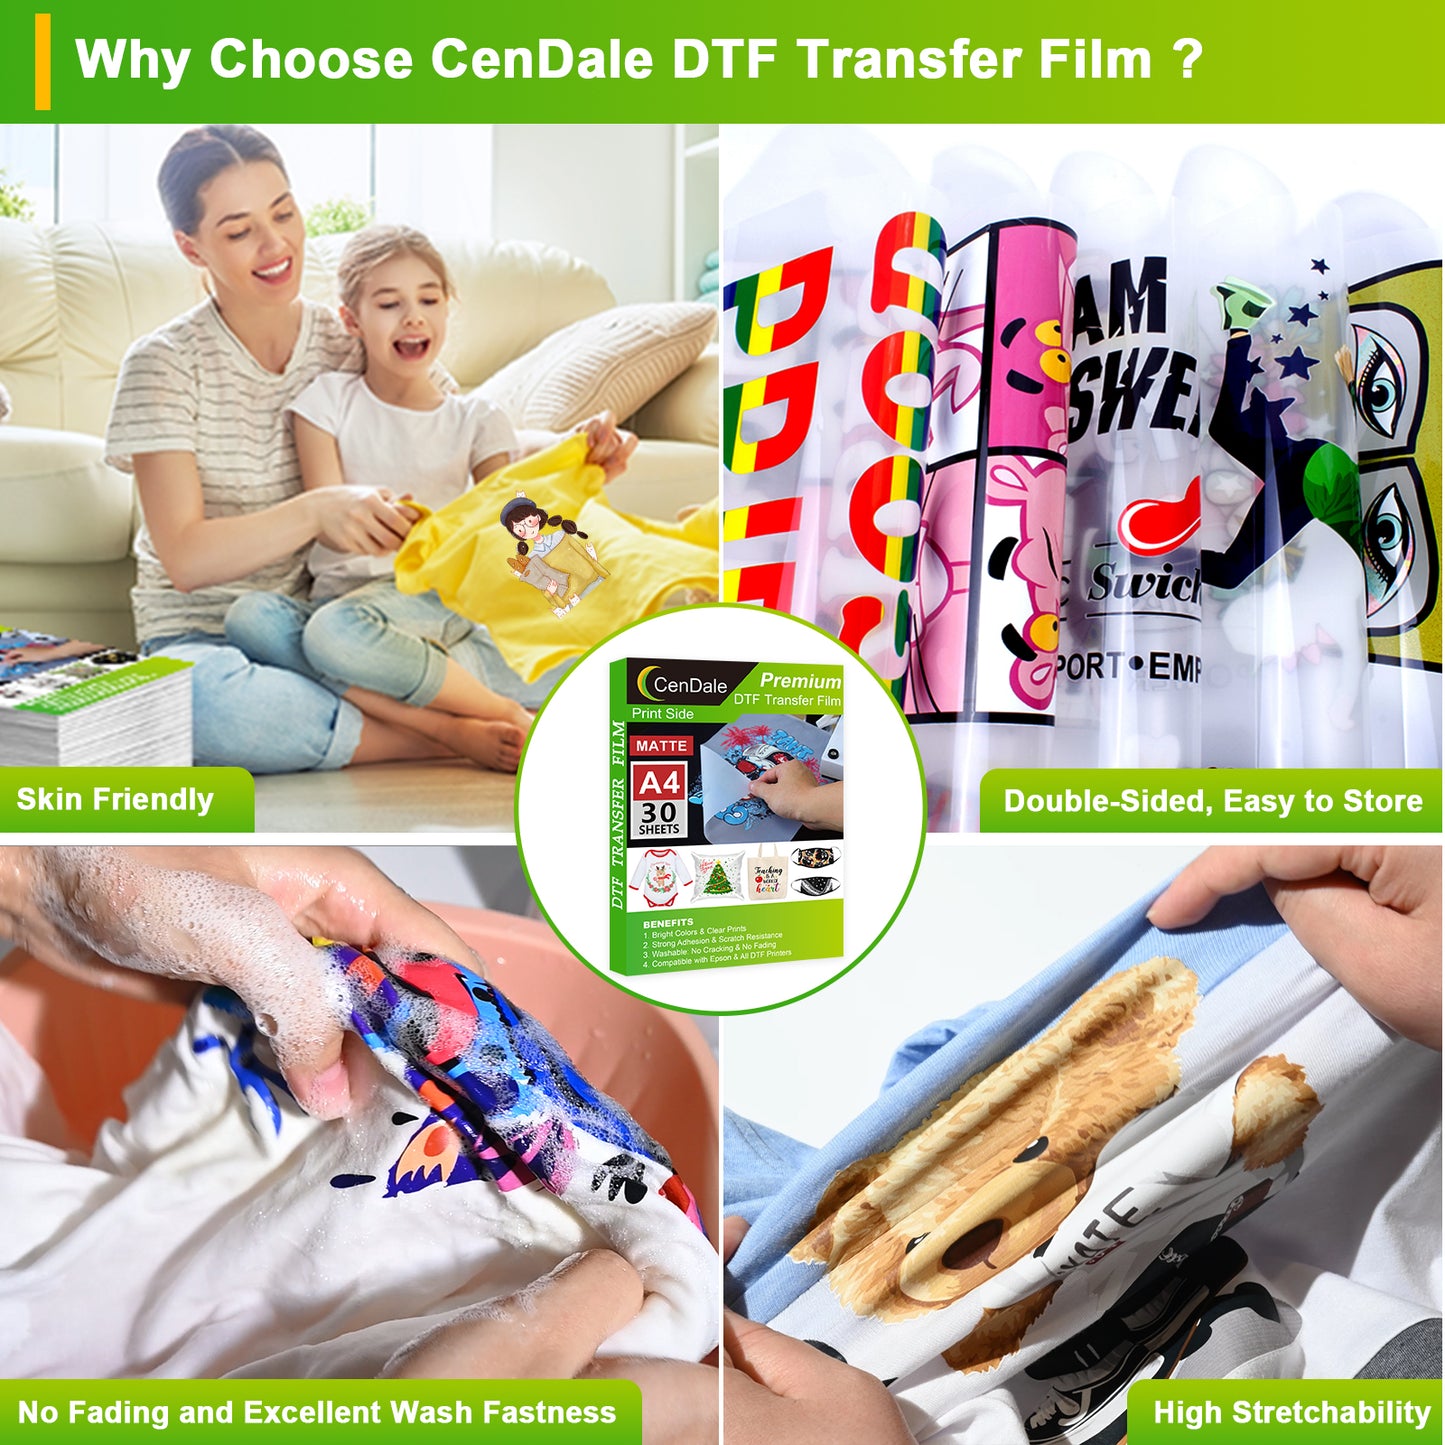 SlickLab A4 DTF Transfer Film and DTF Powder Bundle - 50 Sheets and 500g  DTF Transfer Powder for Sublimation - 8.3 x 11.7 Inches - Double-Sided DTF